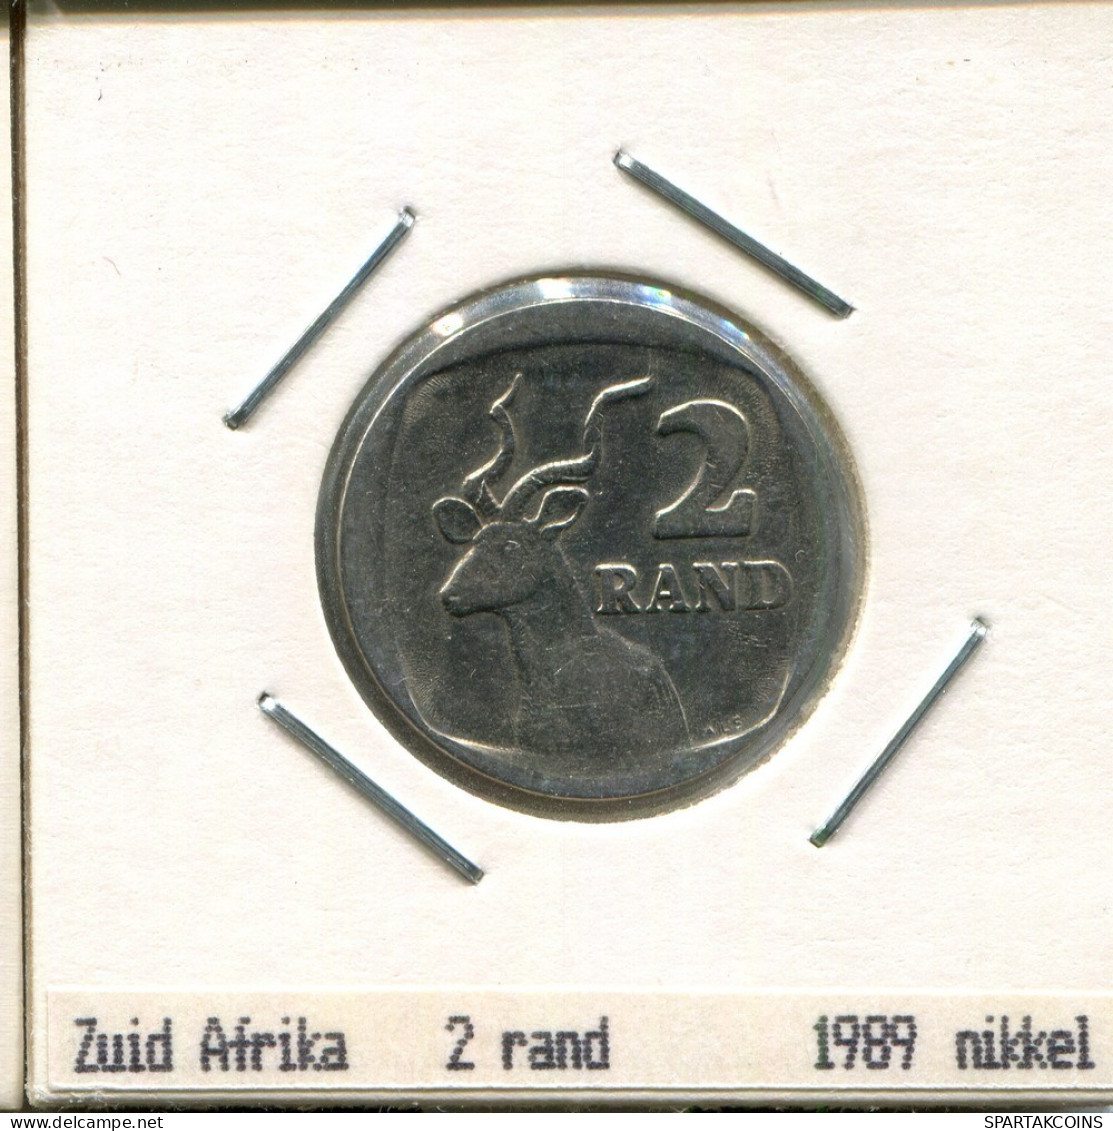 2 RAND 1989 SOUTH AFRICA Coin #AS289.U.A - South Africa